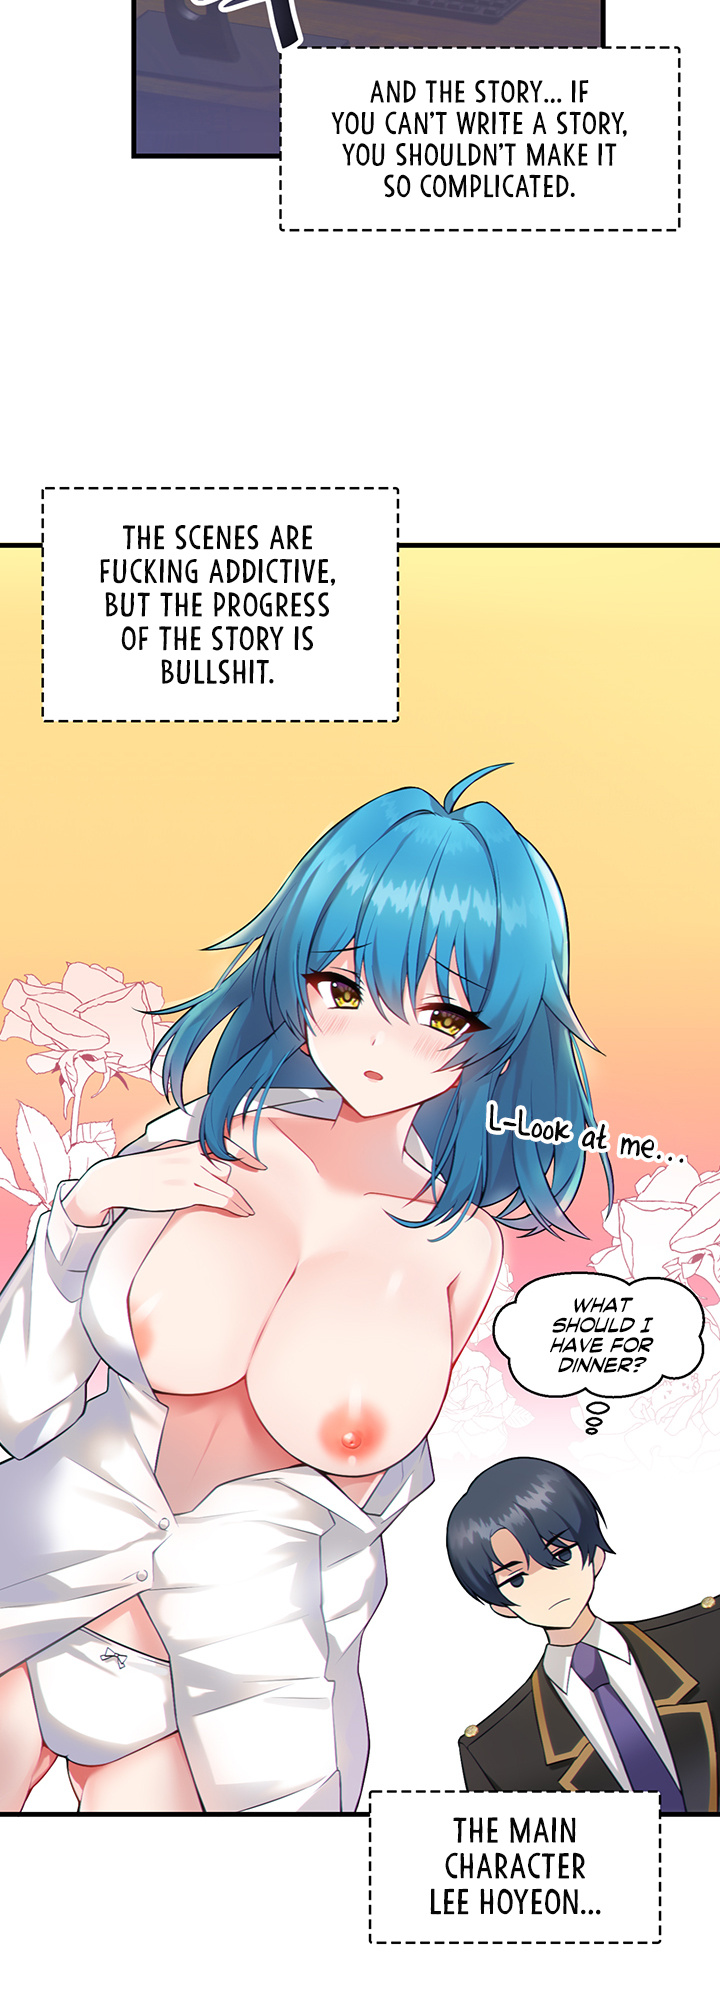 Trapped In The Academy's Eroge - Page 4